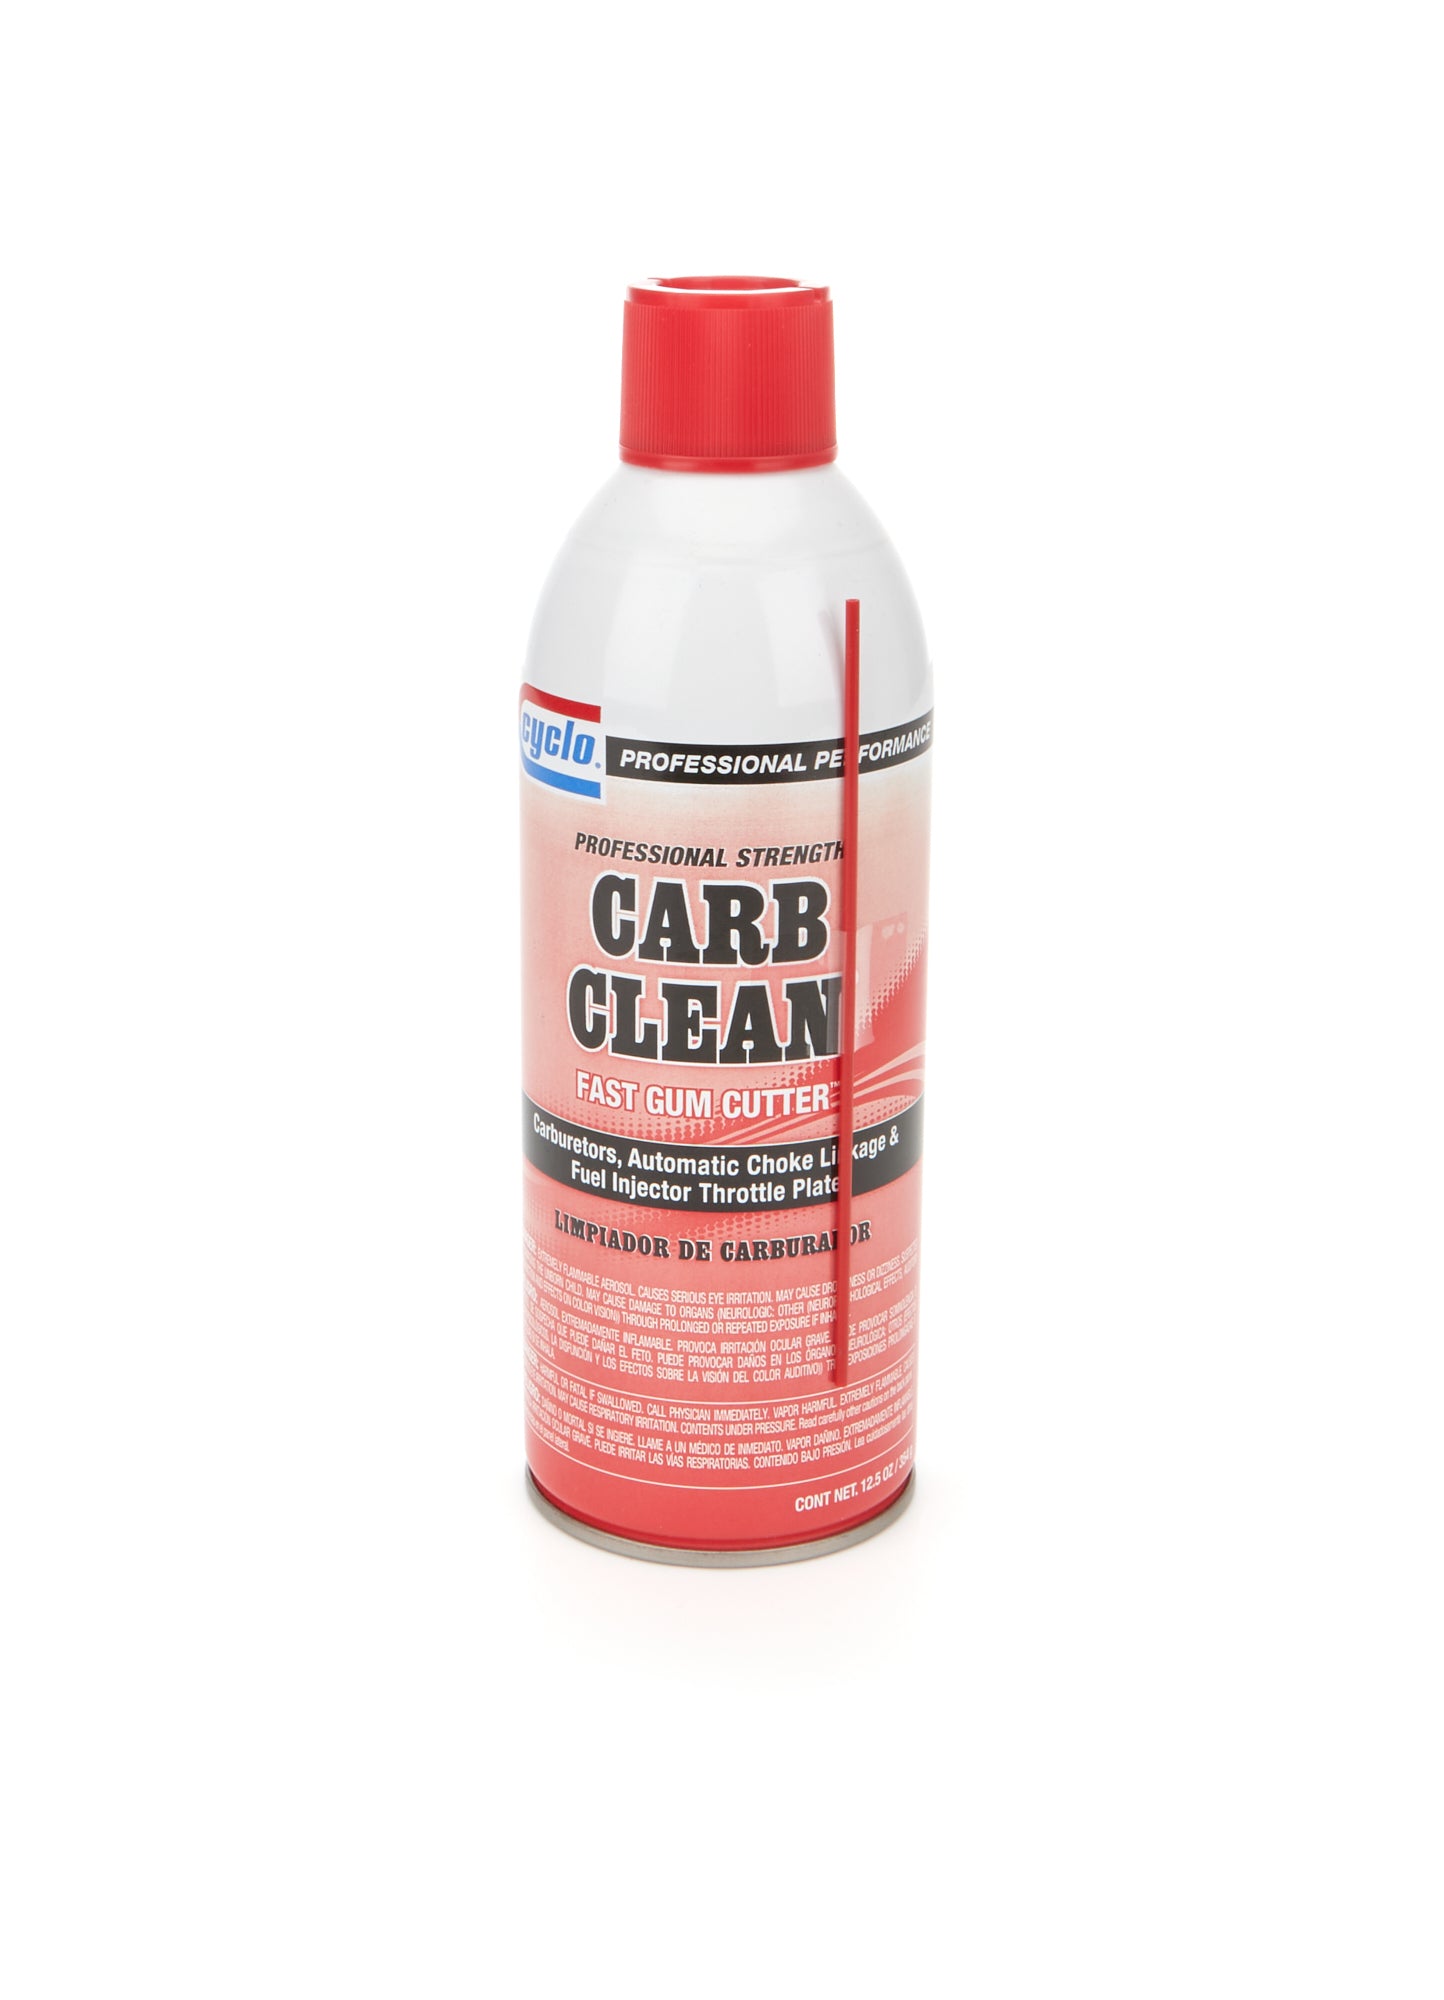 Cyclo CARB CLEANER 10% VOC 12.5OZ Cleaners and Degreasers Multipurpose Cleaners main image